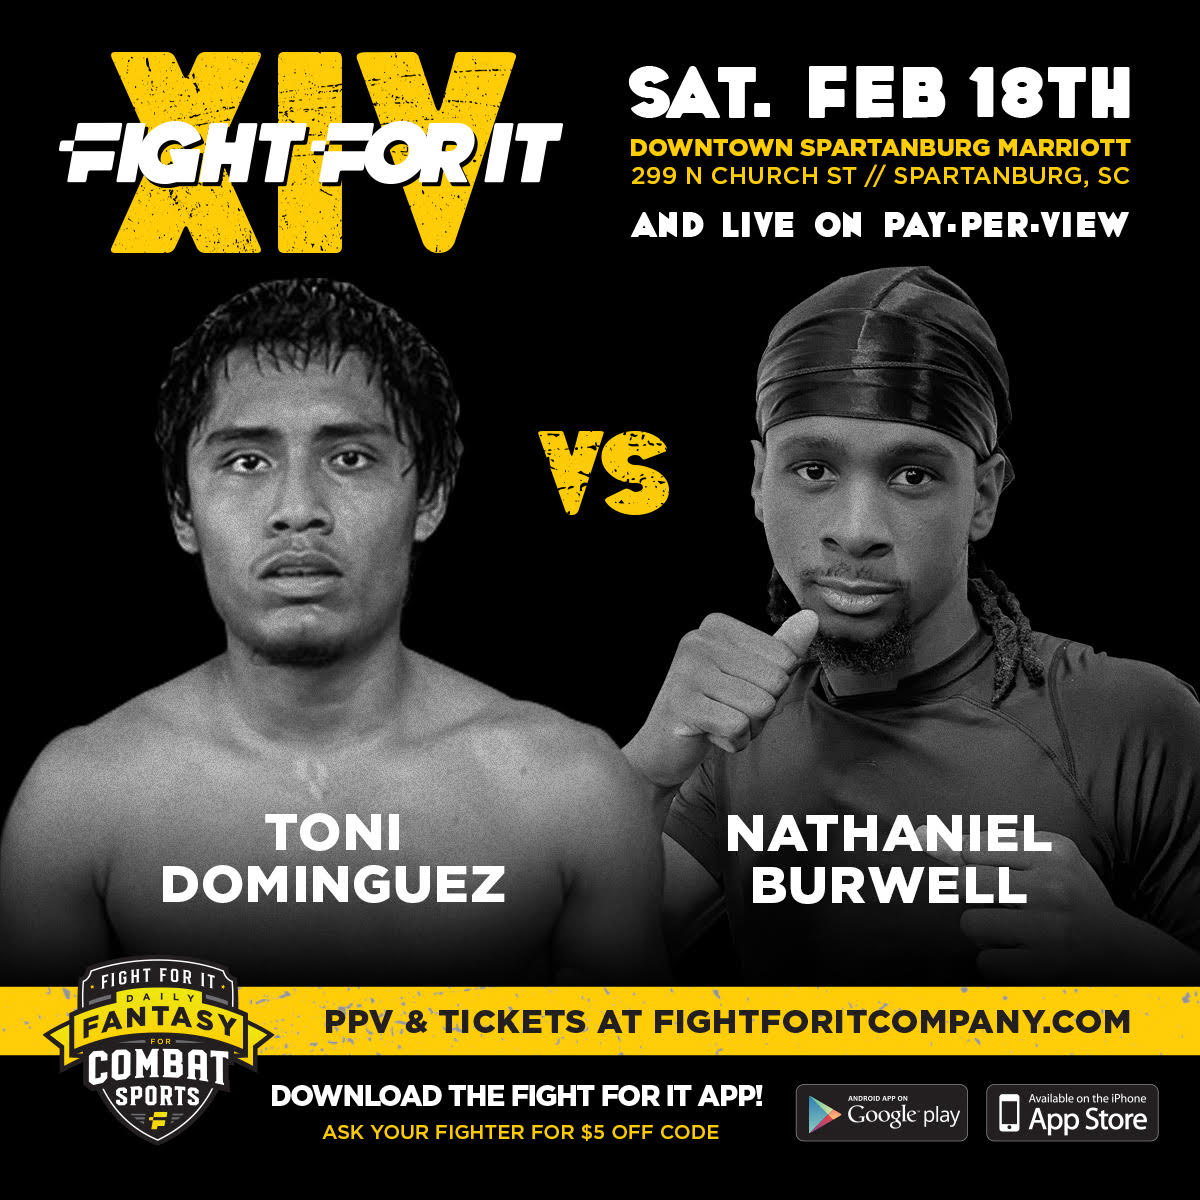 1-1 Nathaniel Burwell welcomes debuting kickboxer Toni Dominguez to the Fight For It promotion